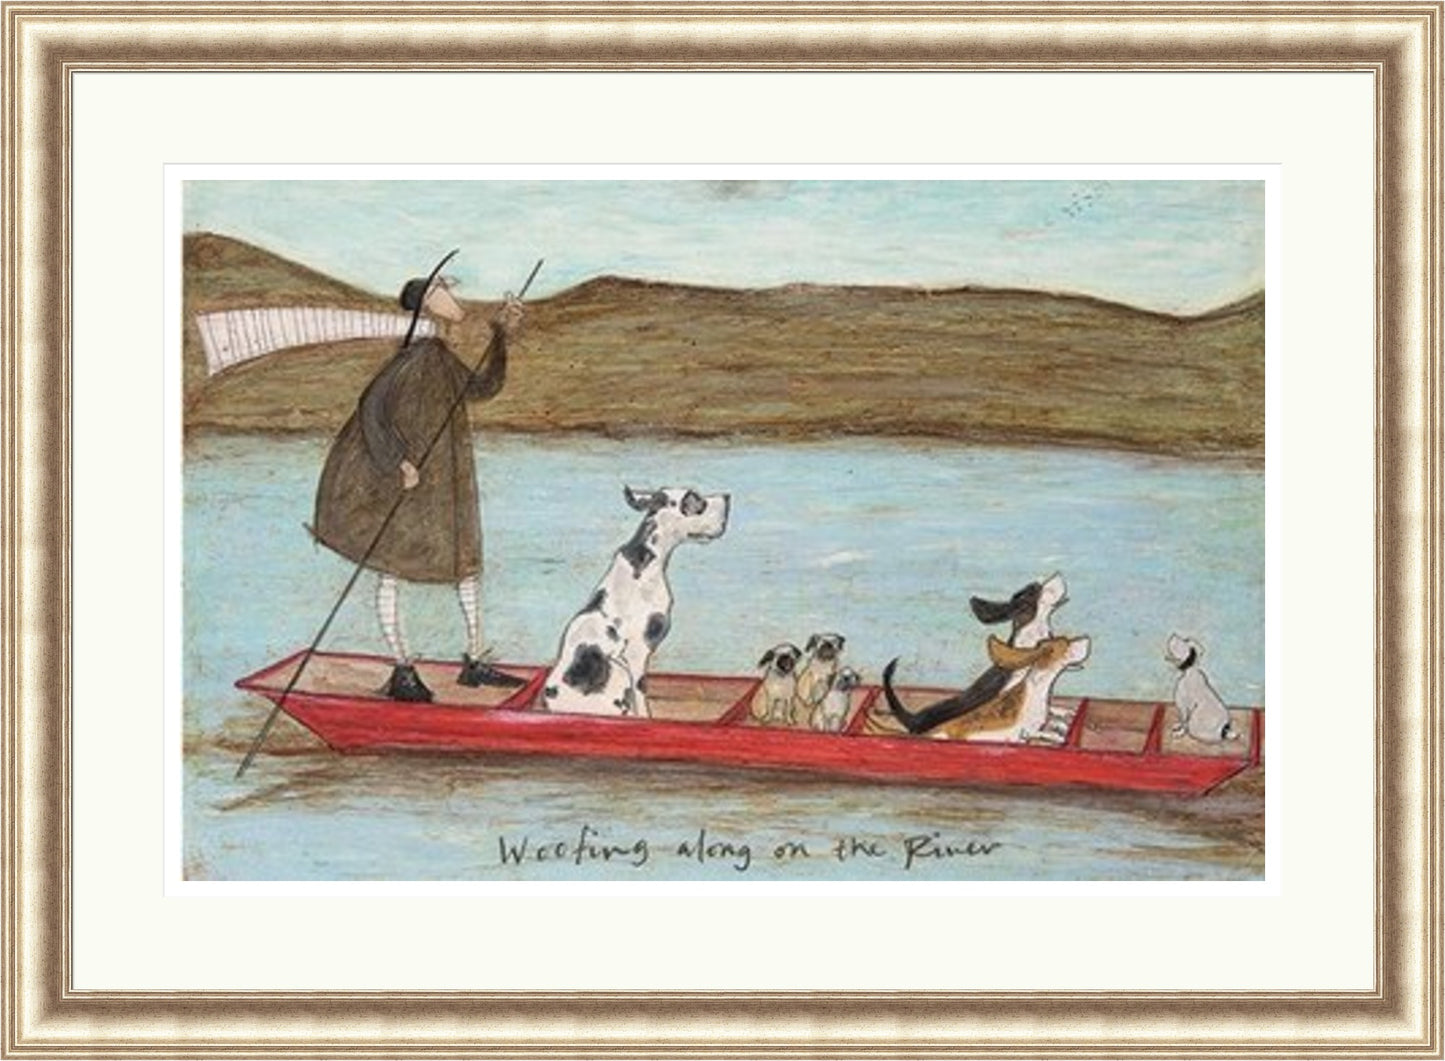 Woofing Along on the River by Sam Toft